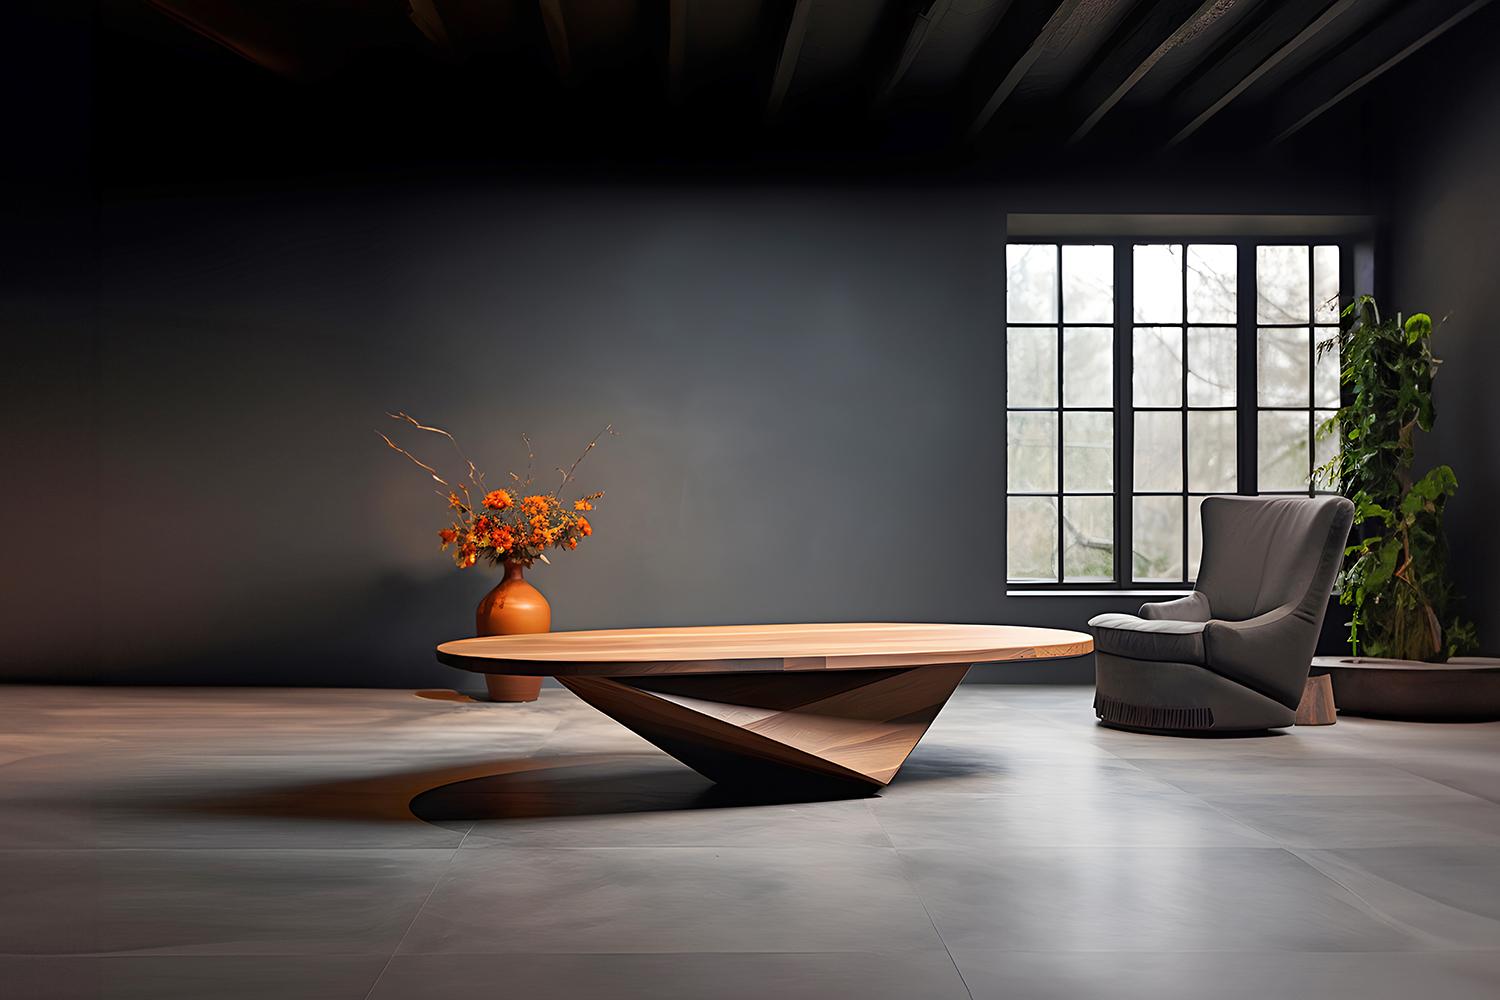 Sculptural Coffee Table Made of Solid Wood, Center Table Solace S12 by NONO


The Solace table series, designed by Joel Escalona, is a furniture collection that exudes balance and presence, thanks to its sensuous, dense, and irregular shapes. These